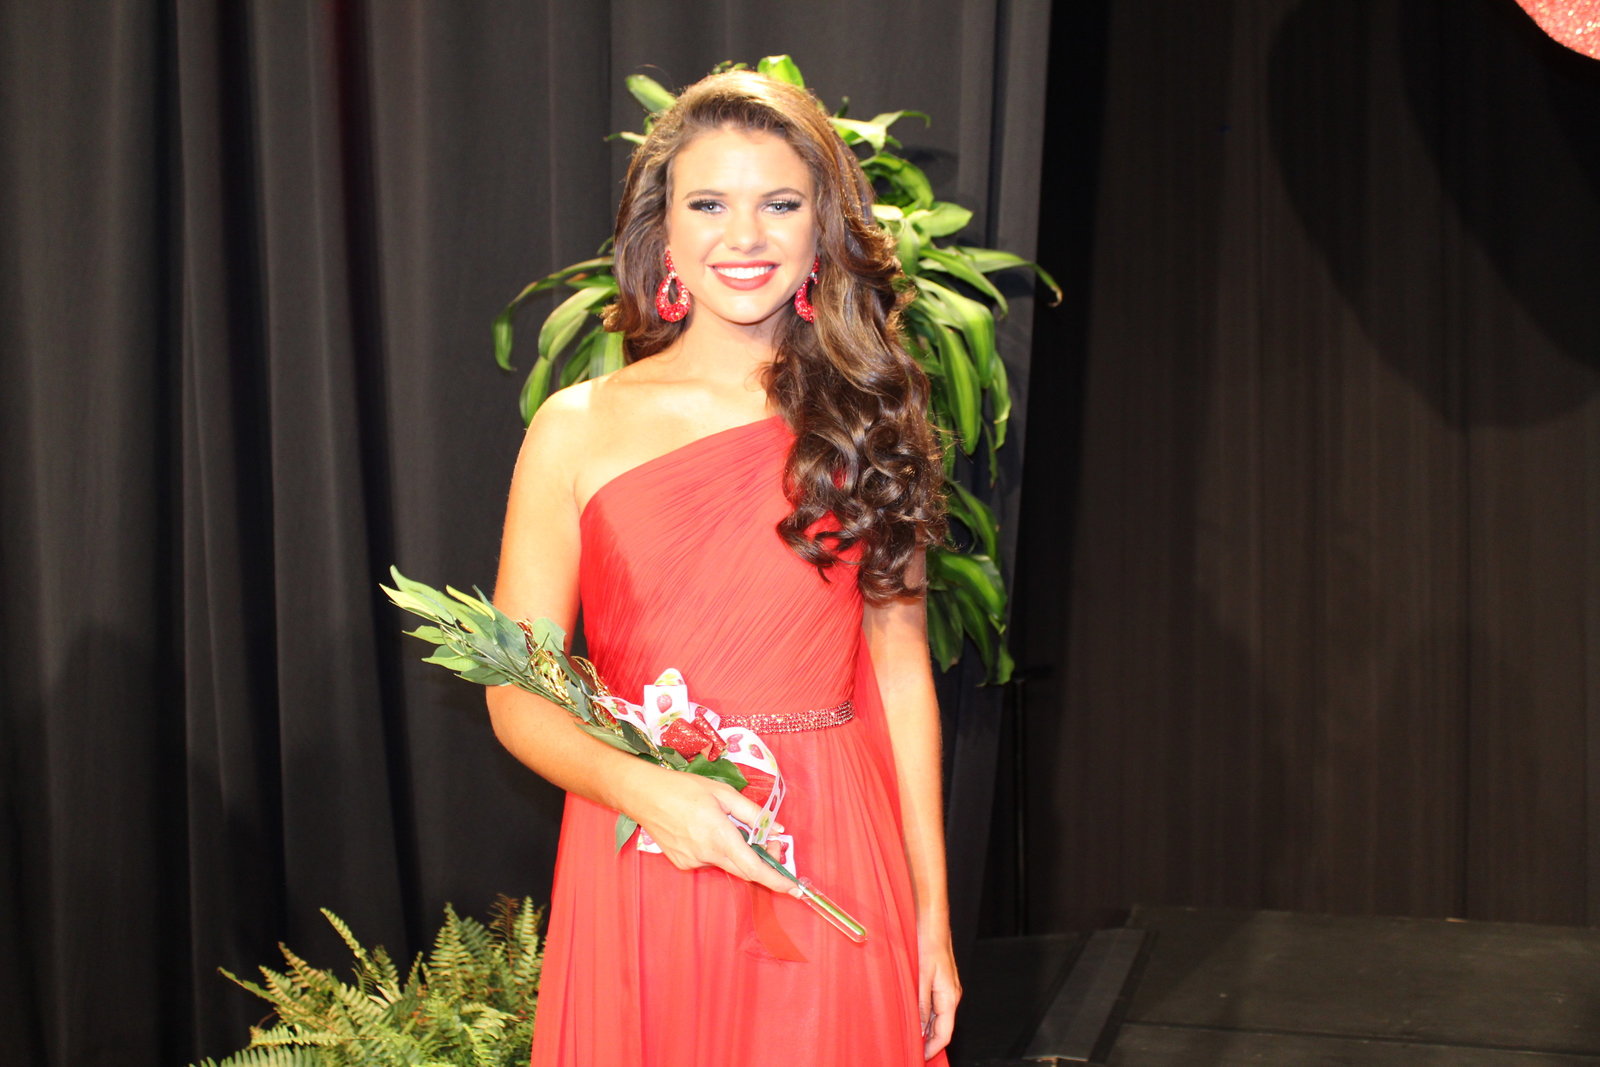 West Tennessee Strawberry Festival - Humboldt TN - Pageant - Main Terr28